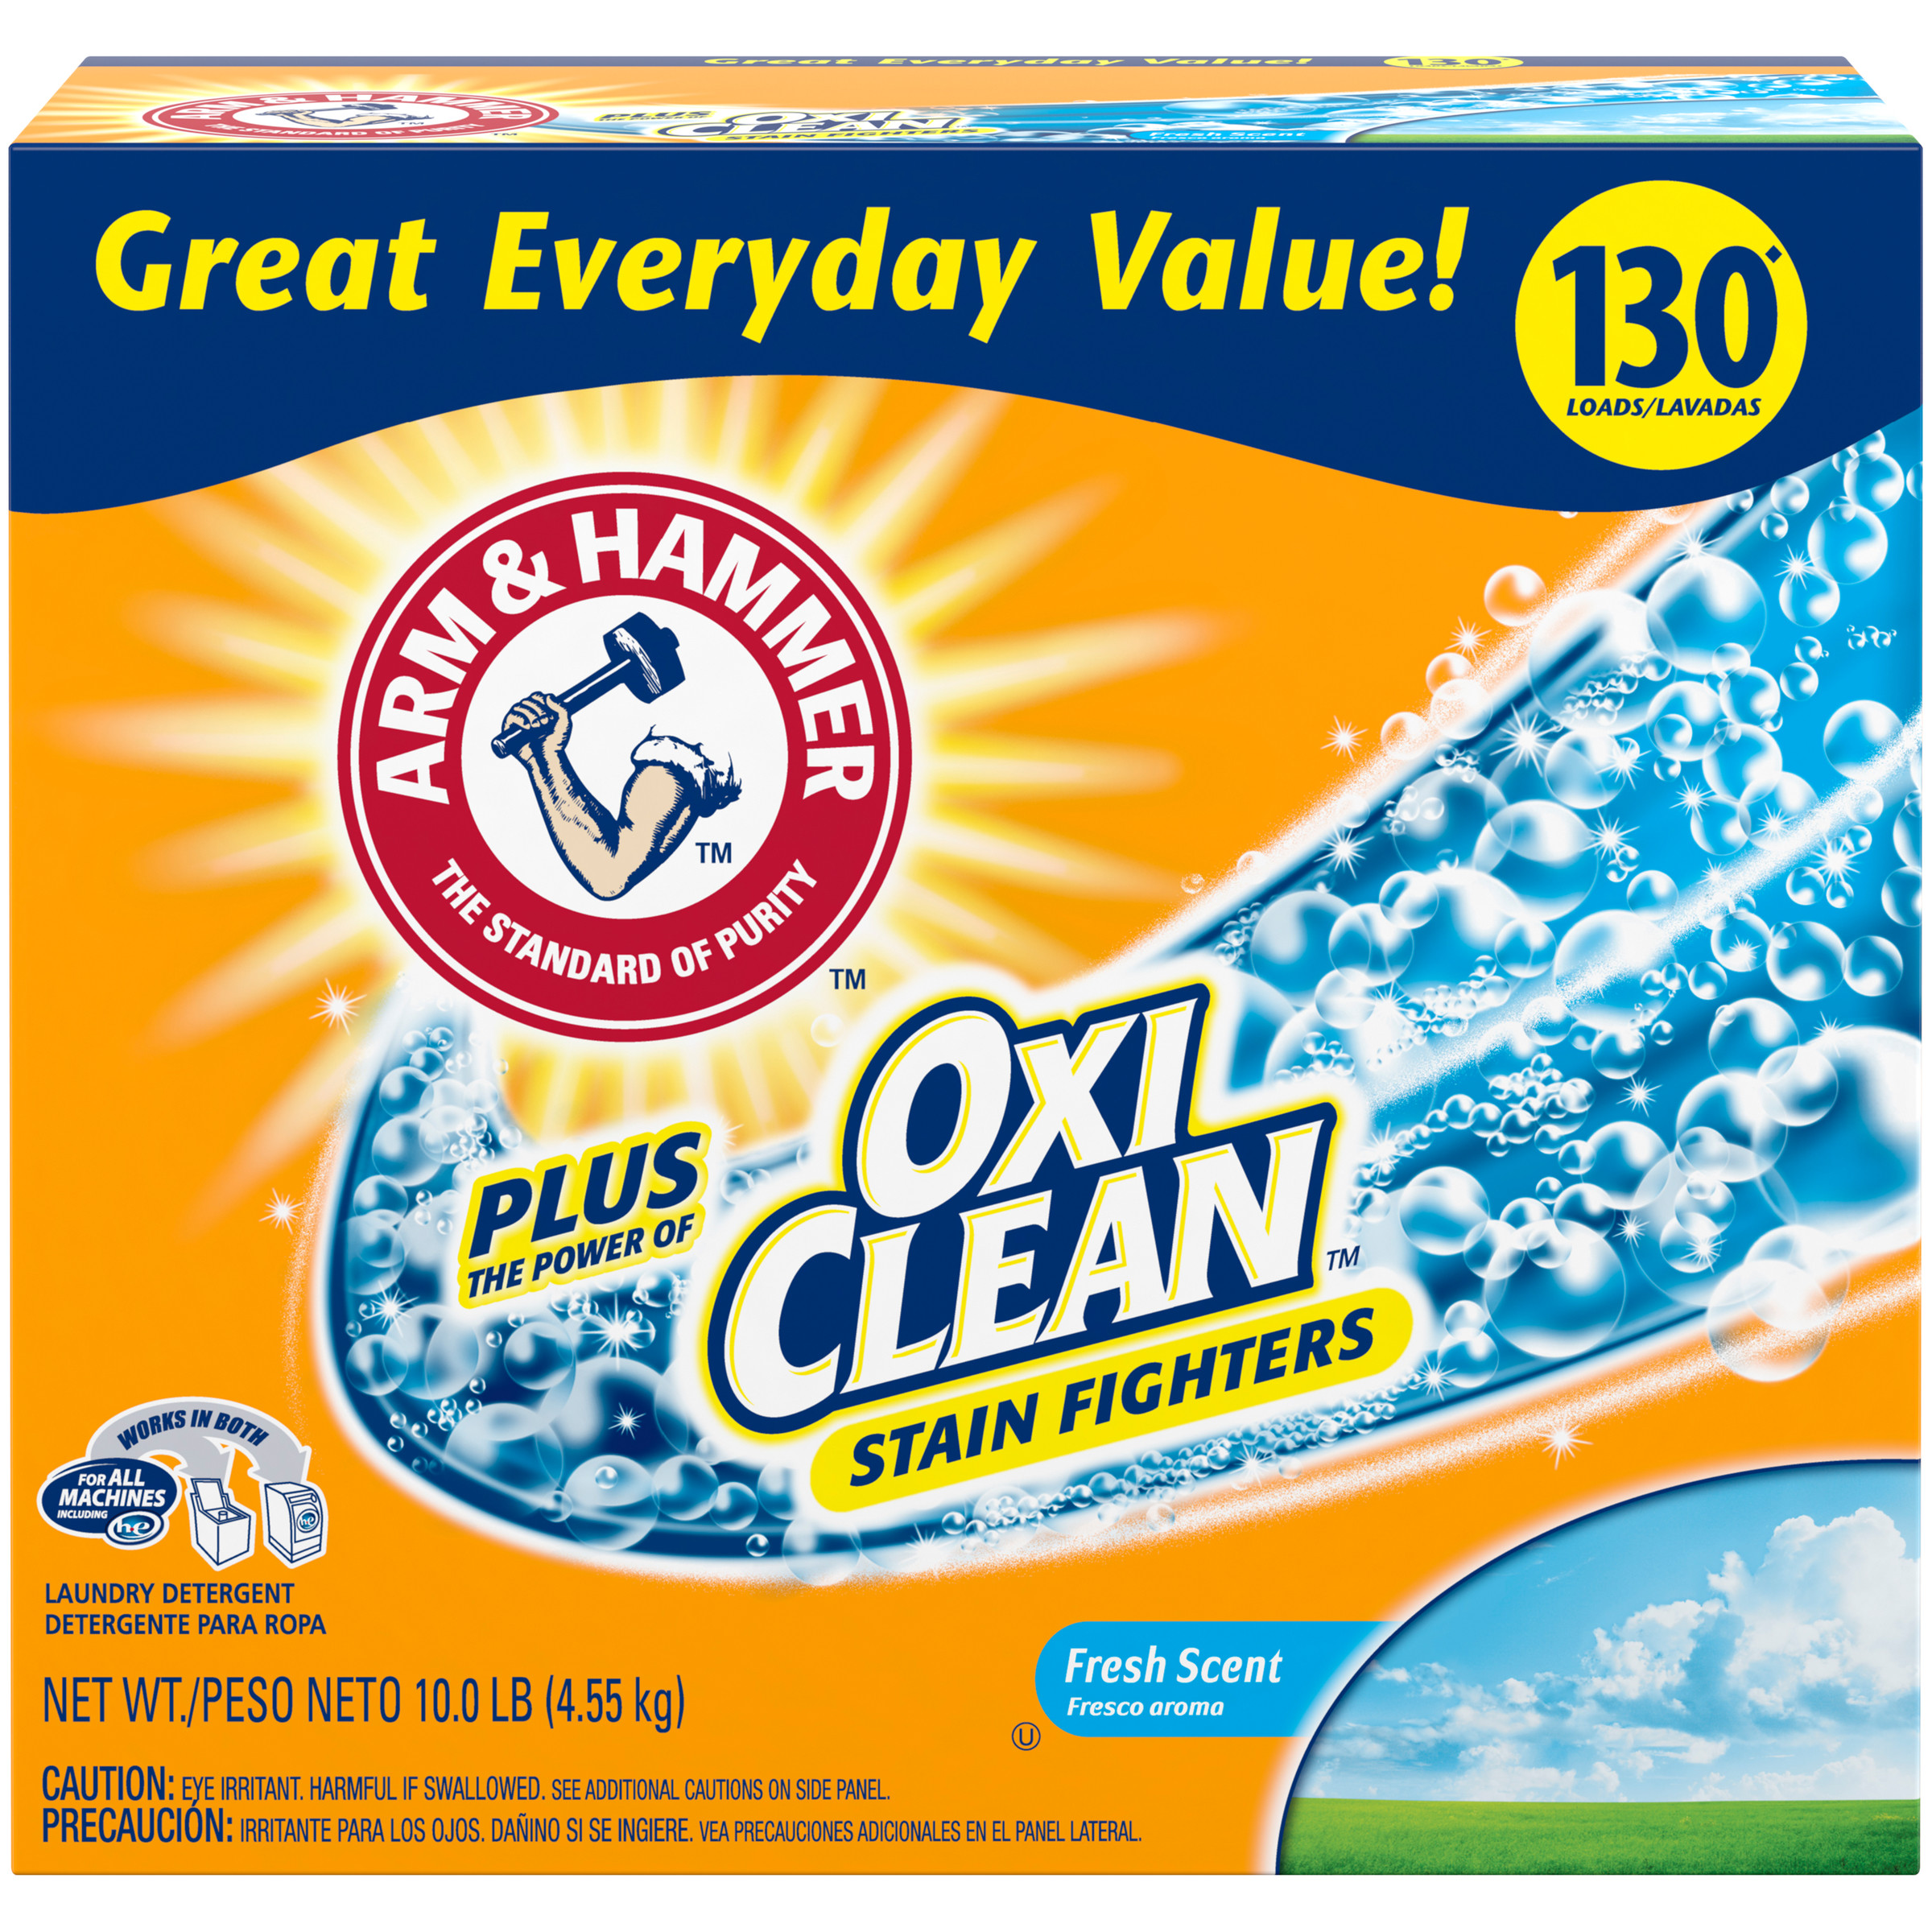 Arm & Hammer Plus OxiClean Powder Laundry Detergent, Fresh Scent, 130 Loads - image 1 of 2